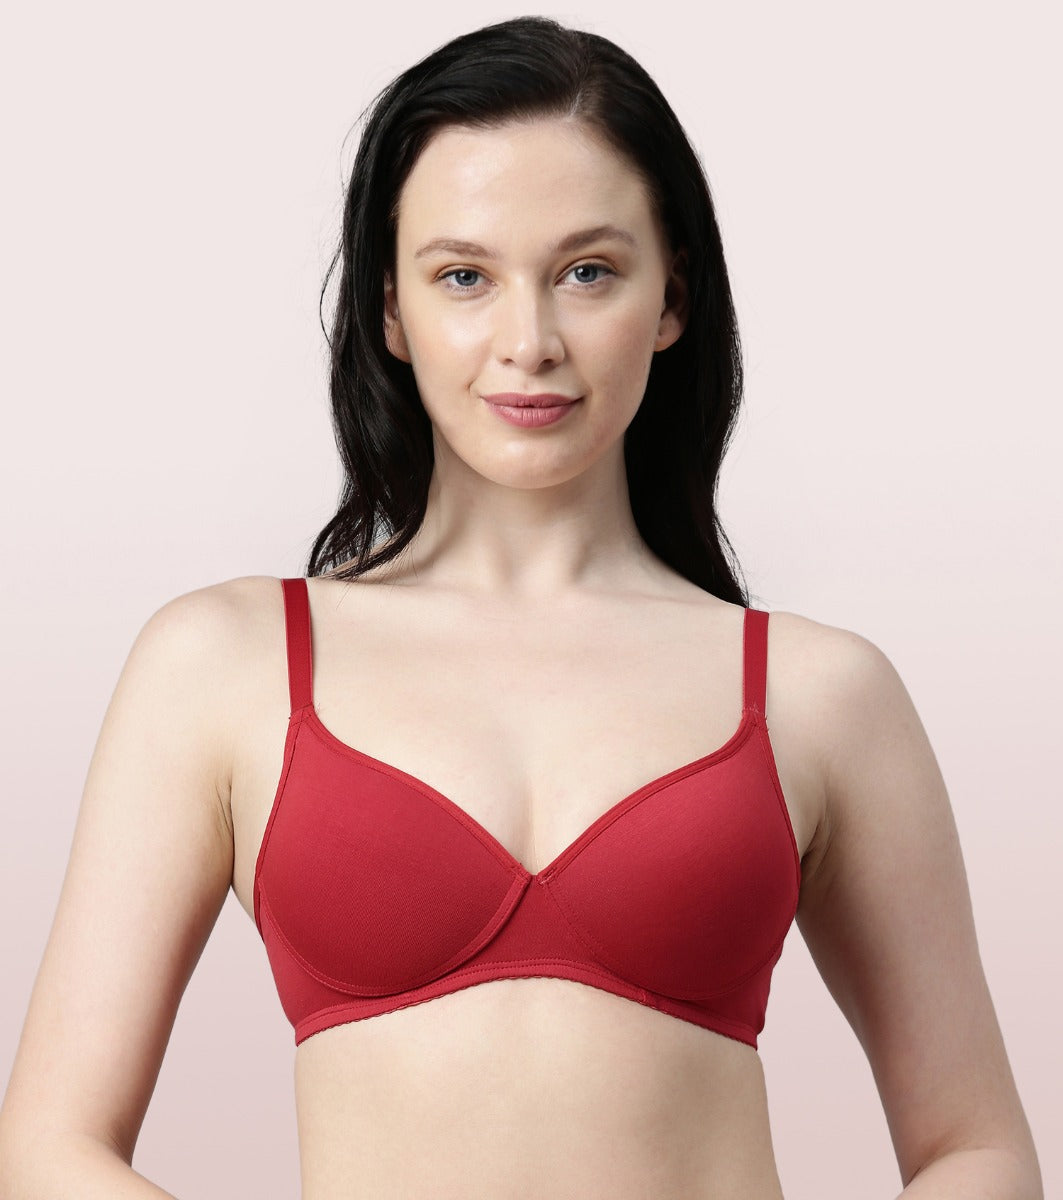 Enamor A039 Cotton, Spandex Full Coverage Wirefree T-Shirt Bra (34B, Black)  in Bangalore at best price by Purple Olive Lingerie Boutique - Justdial